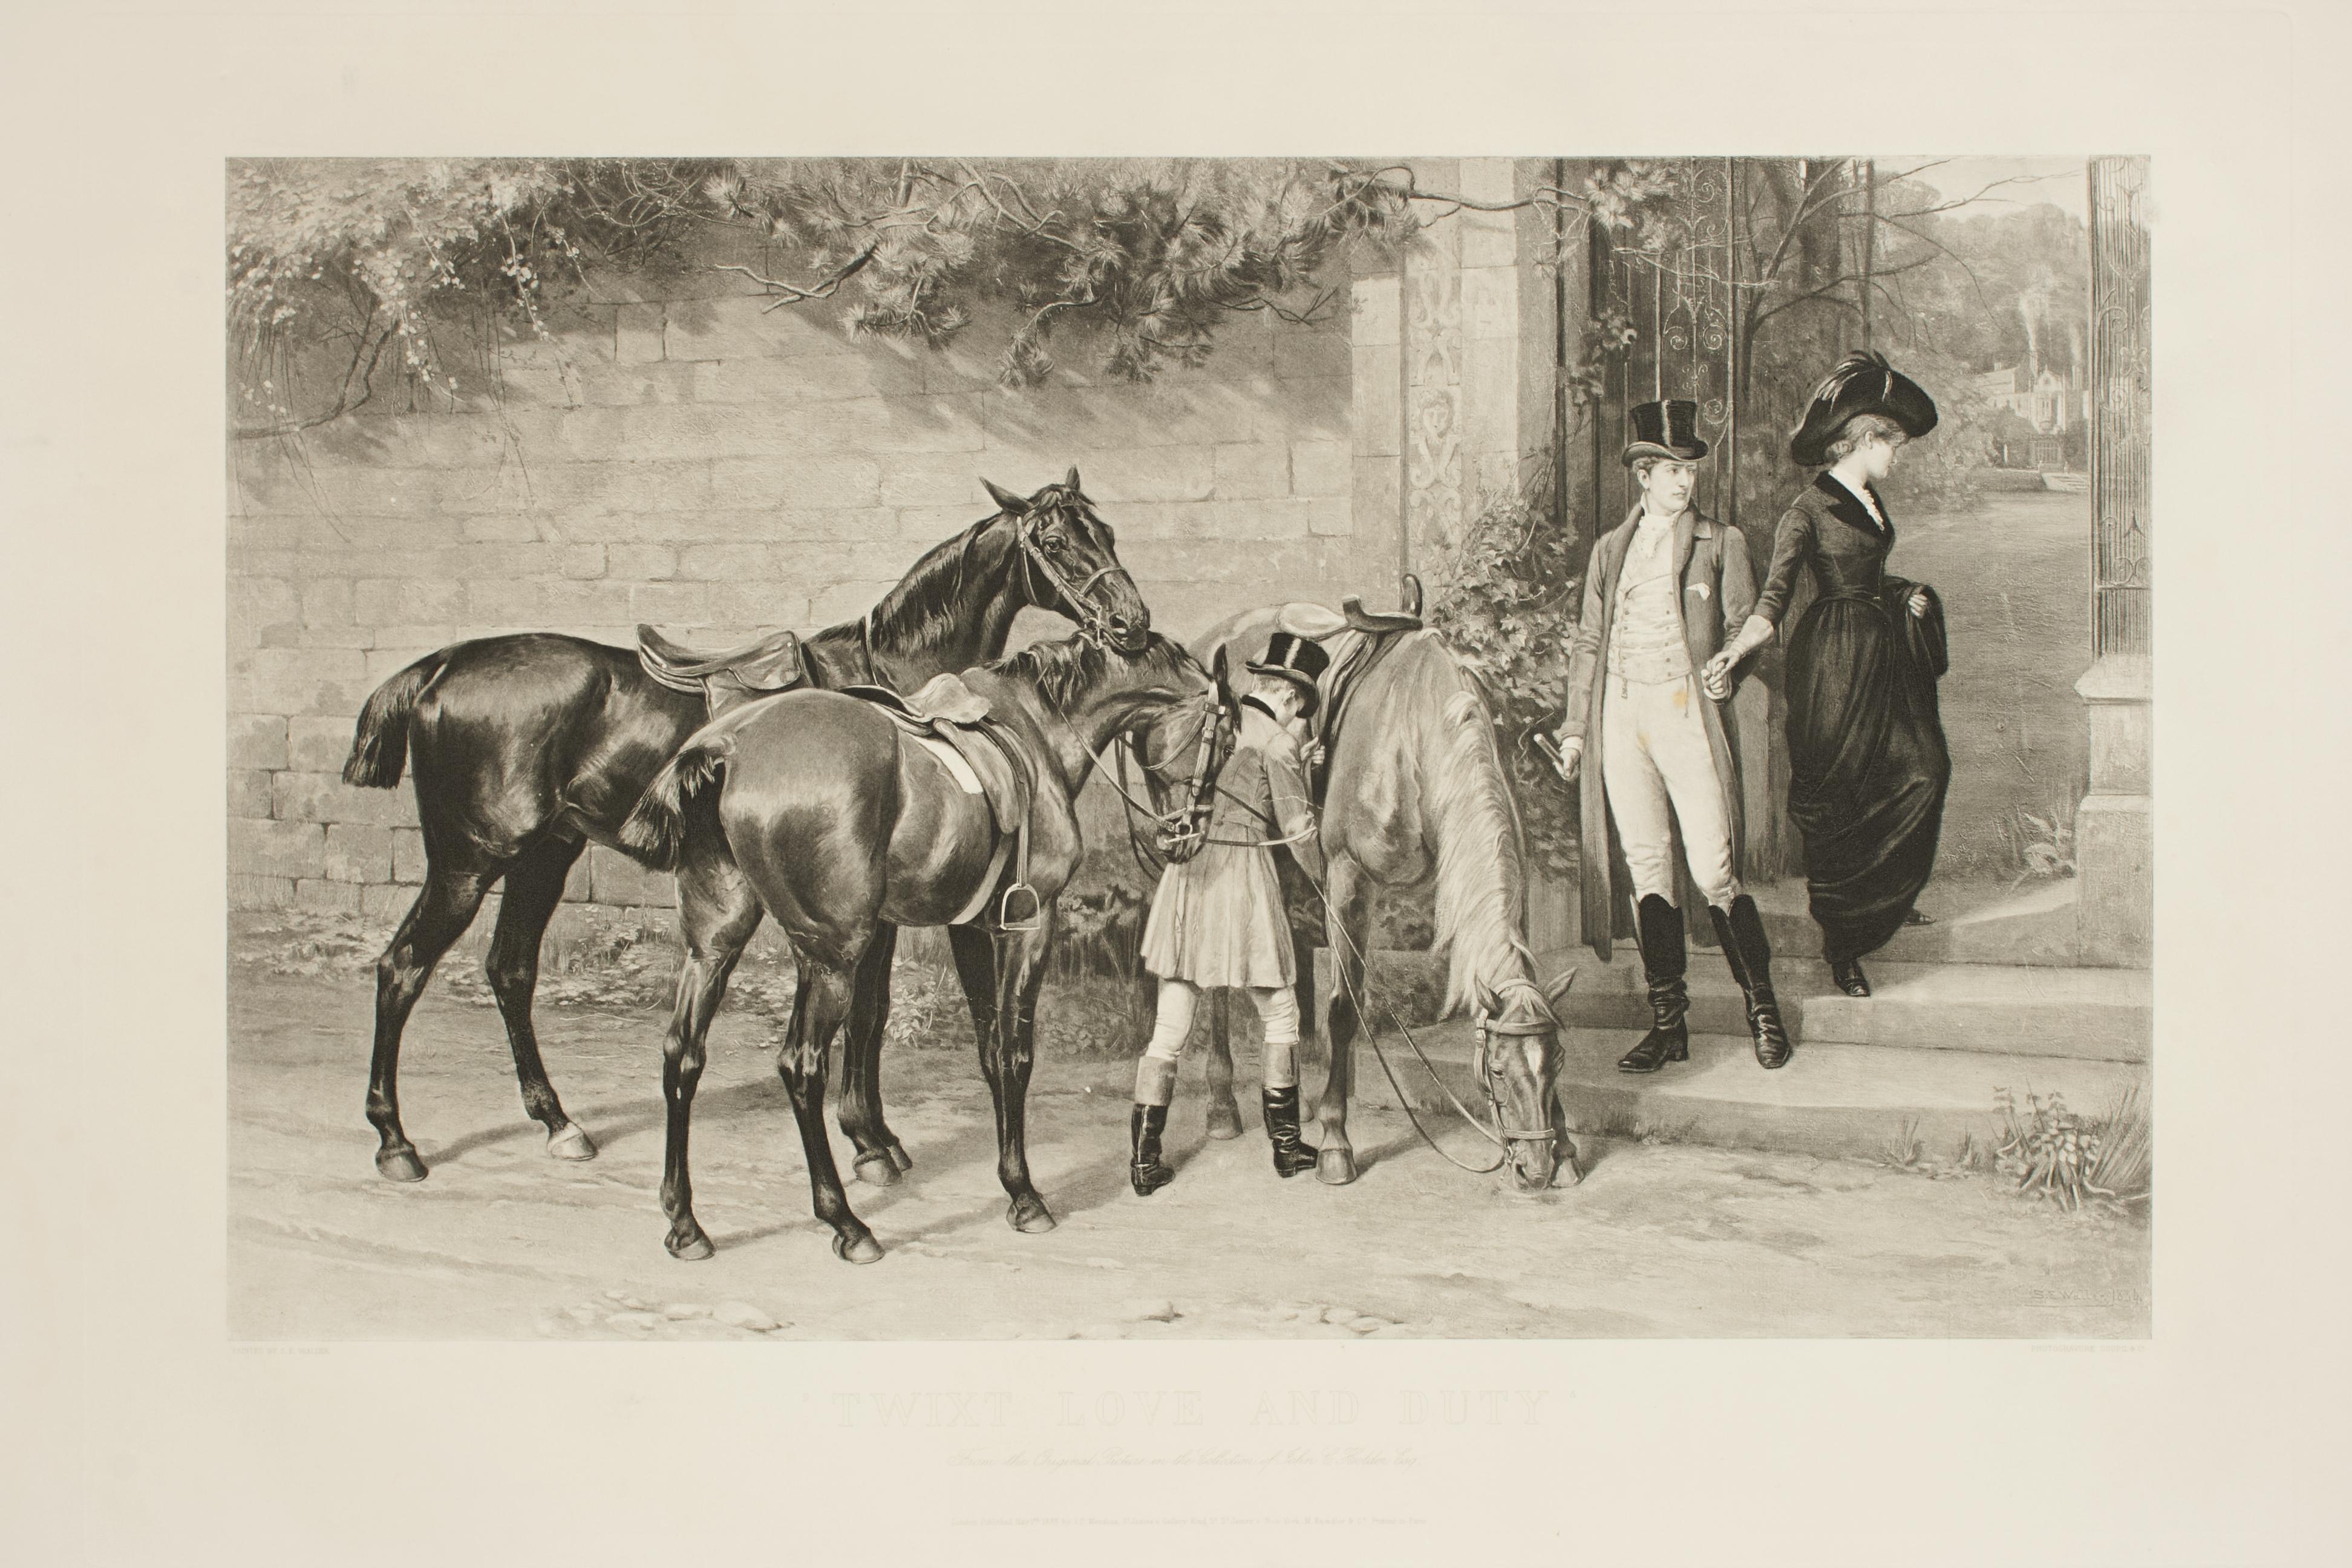 Equestrian print, S.E. Waller.
A fine photogravure after the original painting by Samuel Edmund Waller titled 'Twixt Love And Duty'. The 'romantic' print depicts an elopement scene between a lady and her gentleman, the lady taking one final look